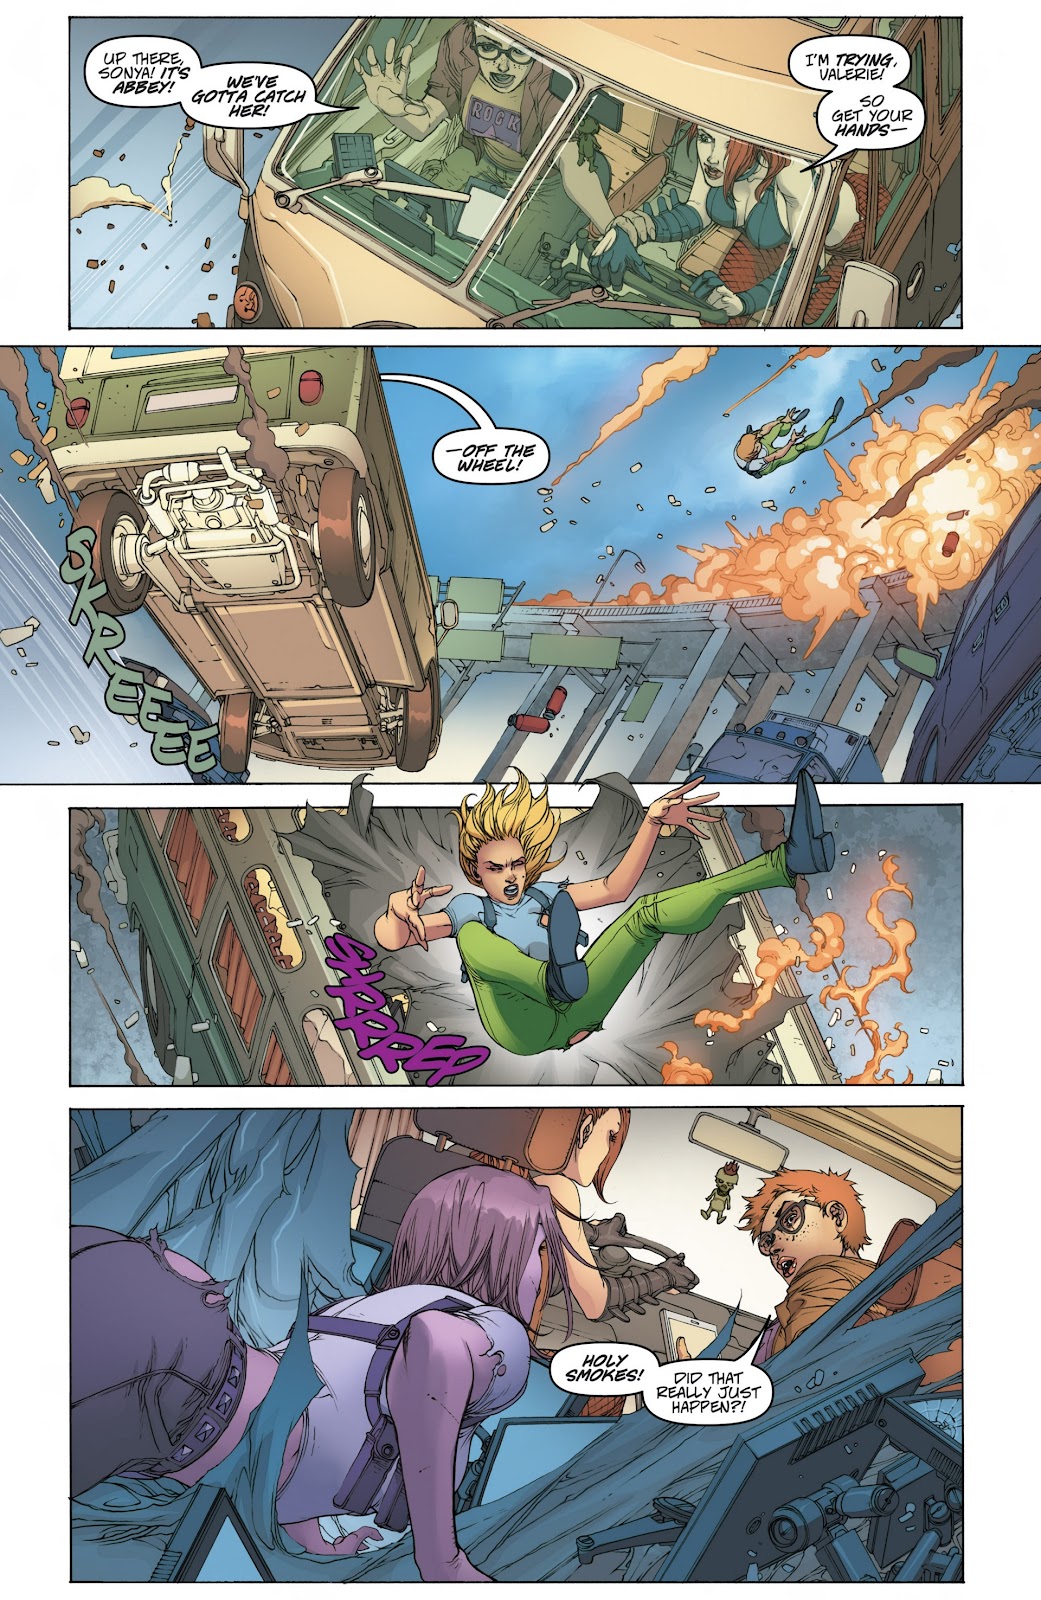 Danger Girl: The Chase issue 3 - Page 4